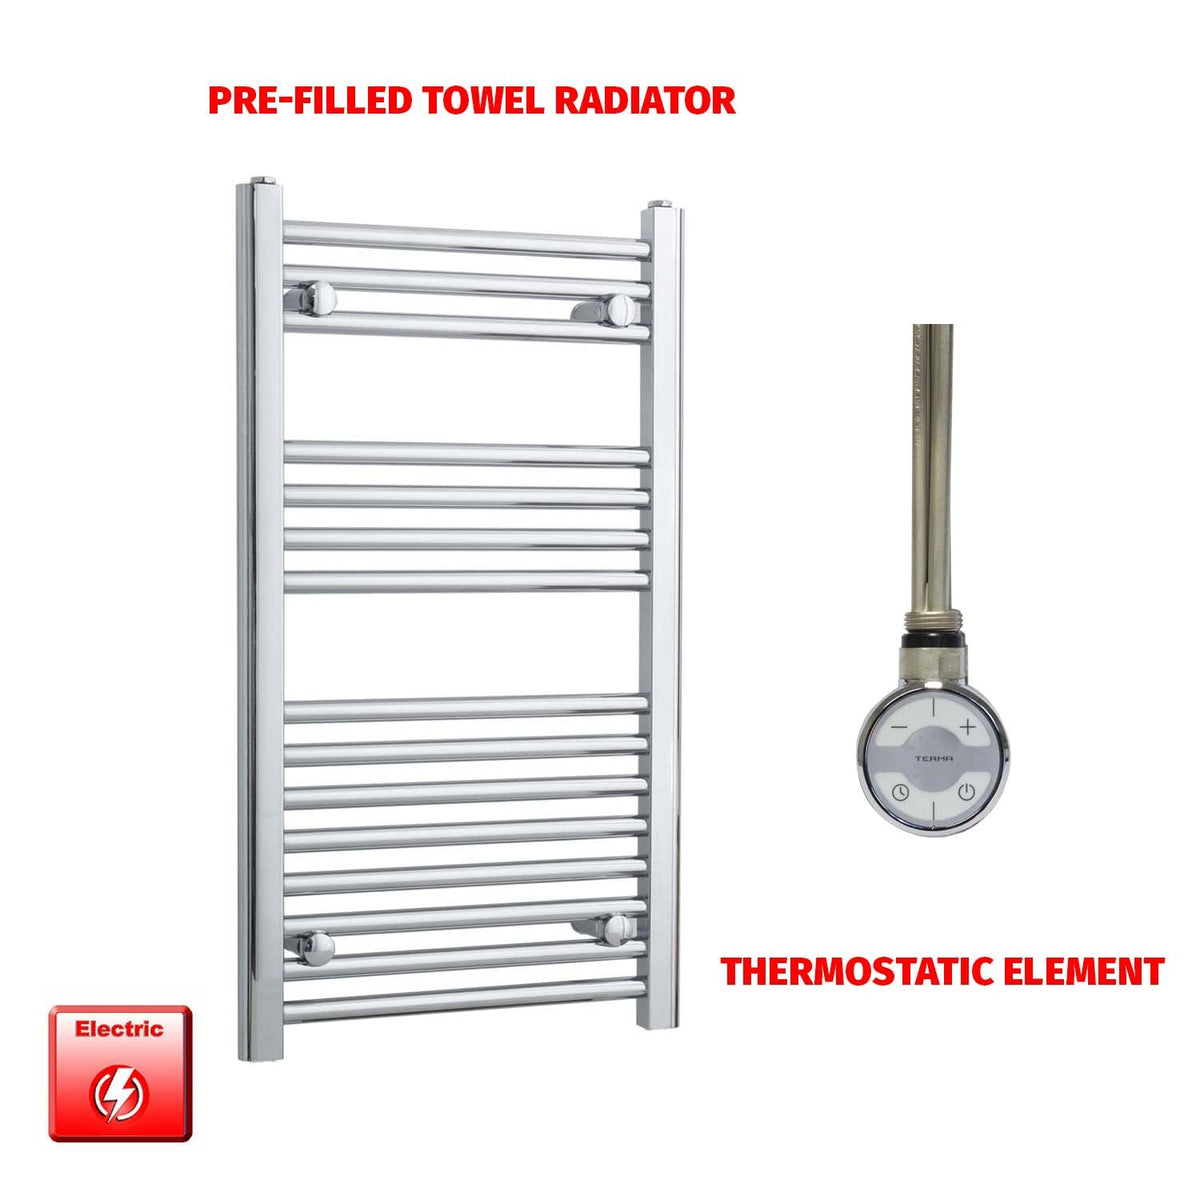 800mm High 450mm Wide Pre-Filled Electric Heated Towel Radiator Straight Chrome MOA Thermostatic element no timer